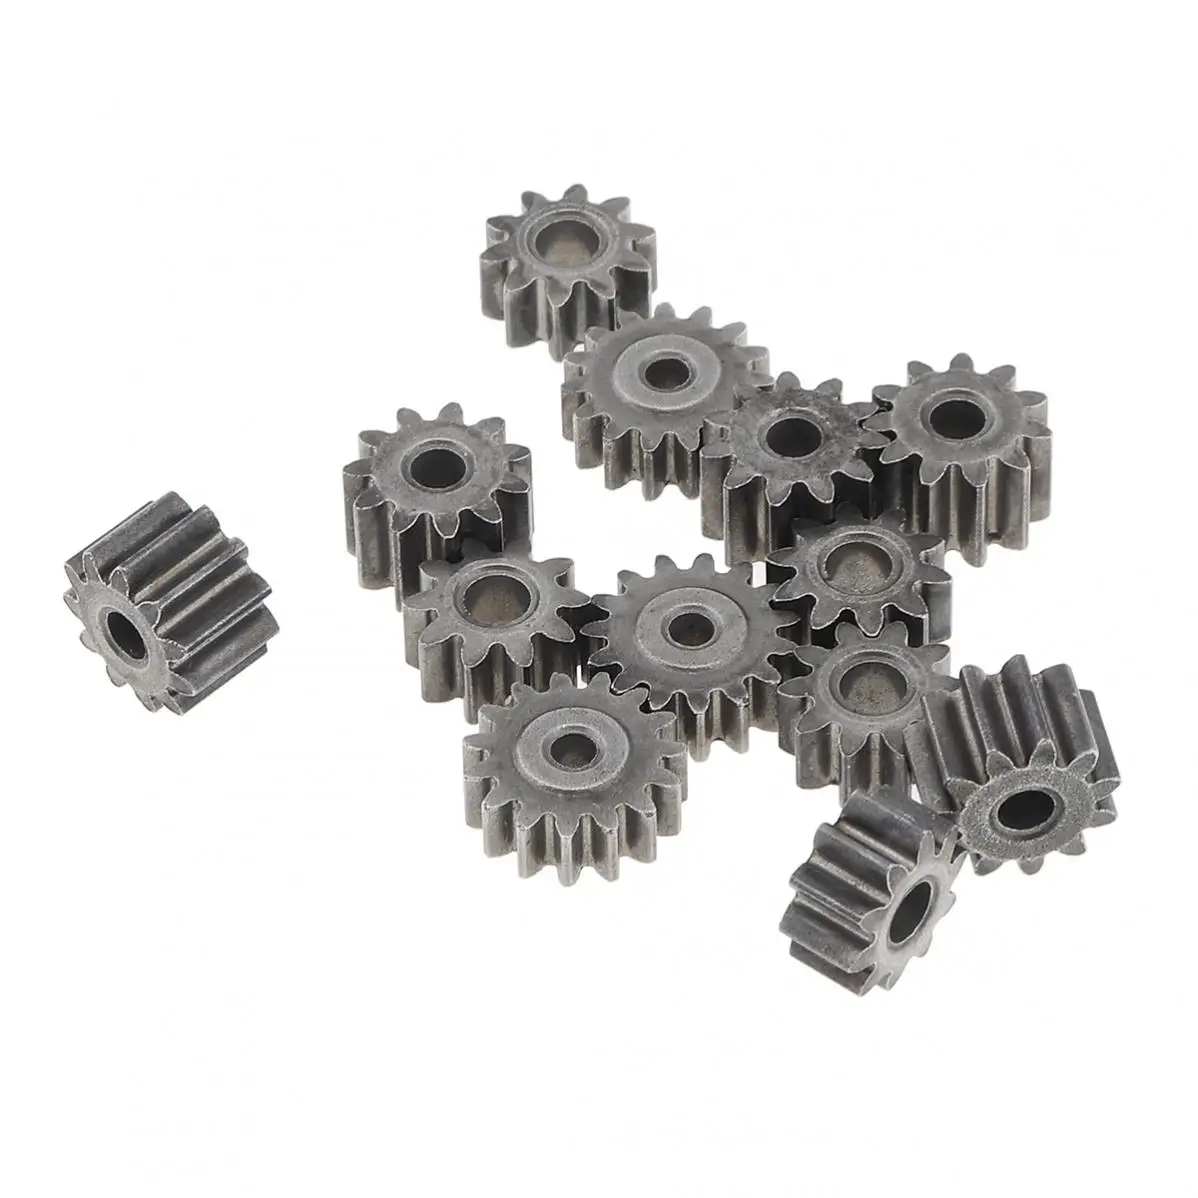 Two-Speed Charging Drill Gear Set 12V Double Speed Planetary Gear Set Reduction Gear Accessories High Quality for Motor images - 6